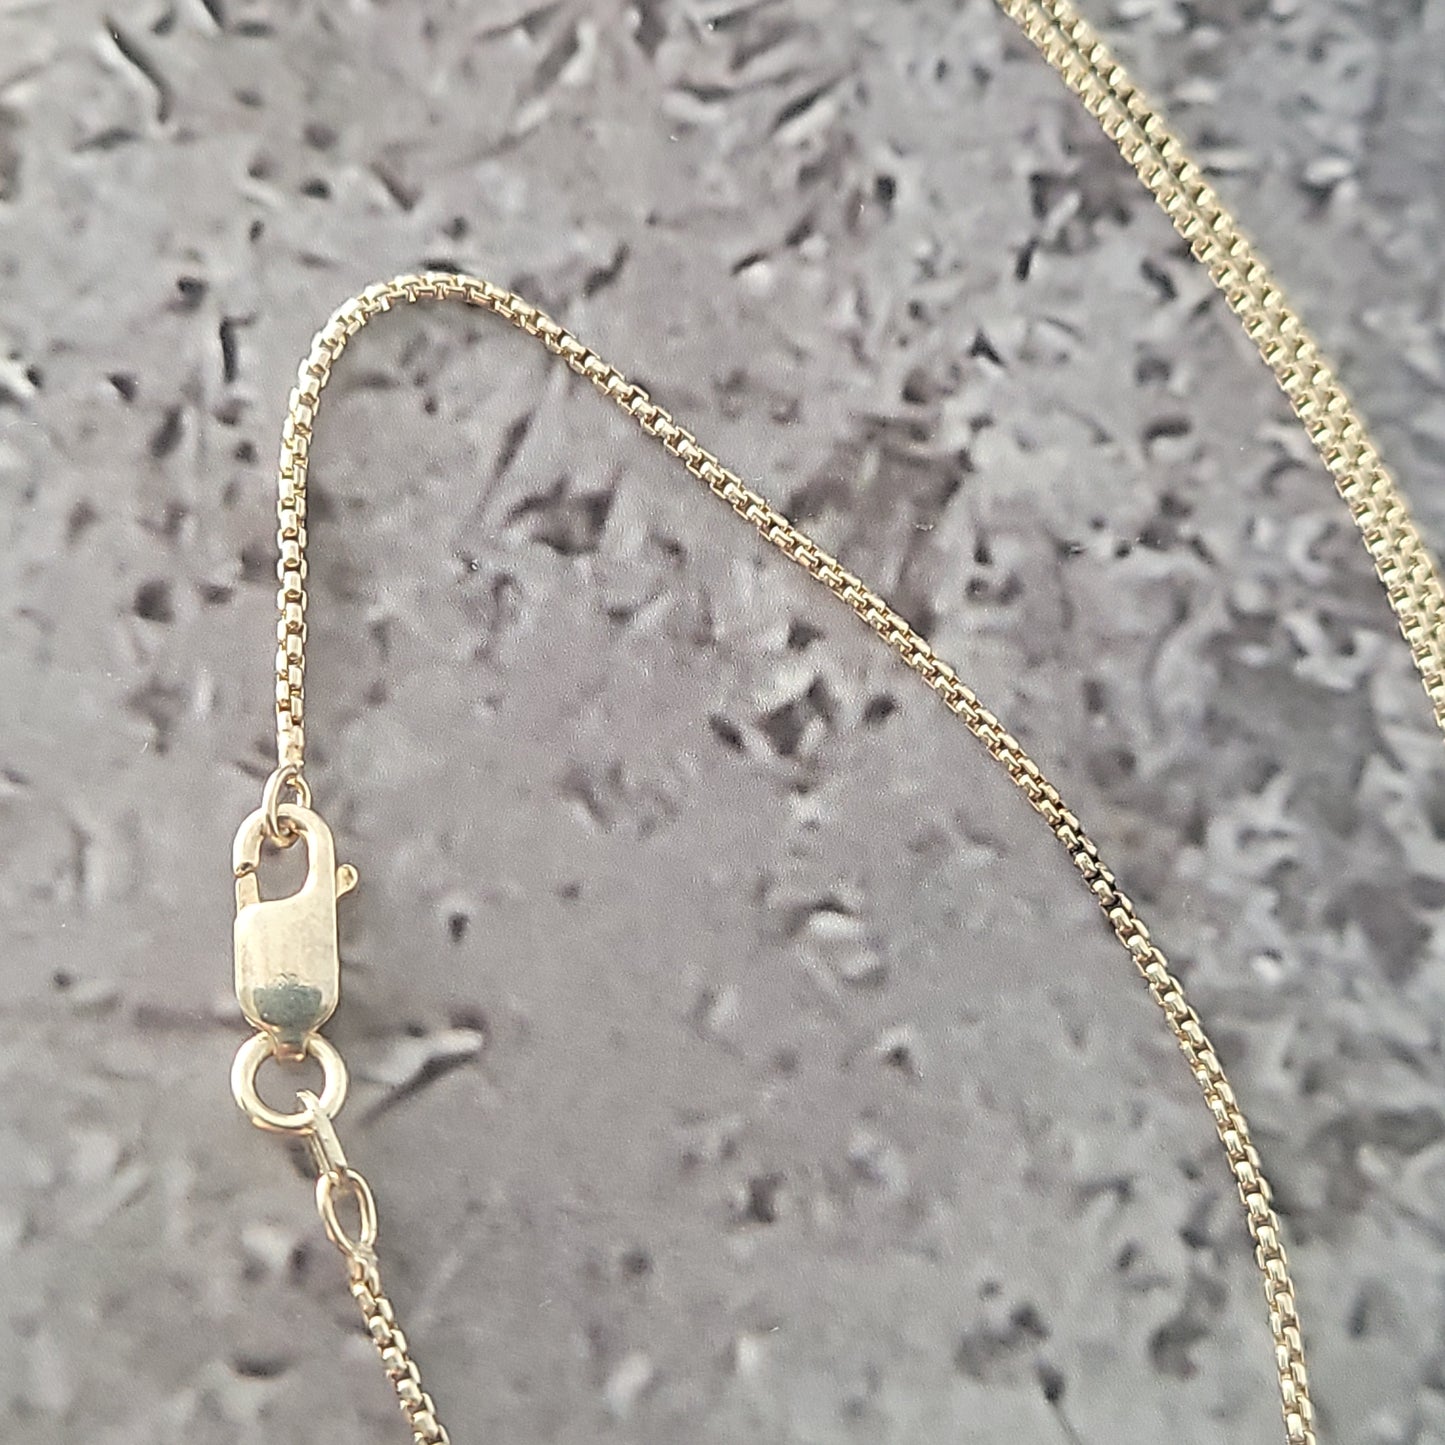 18" Sterling Silver Chain